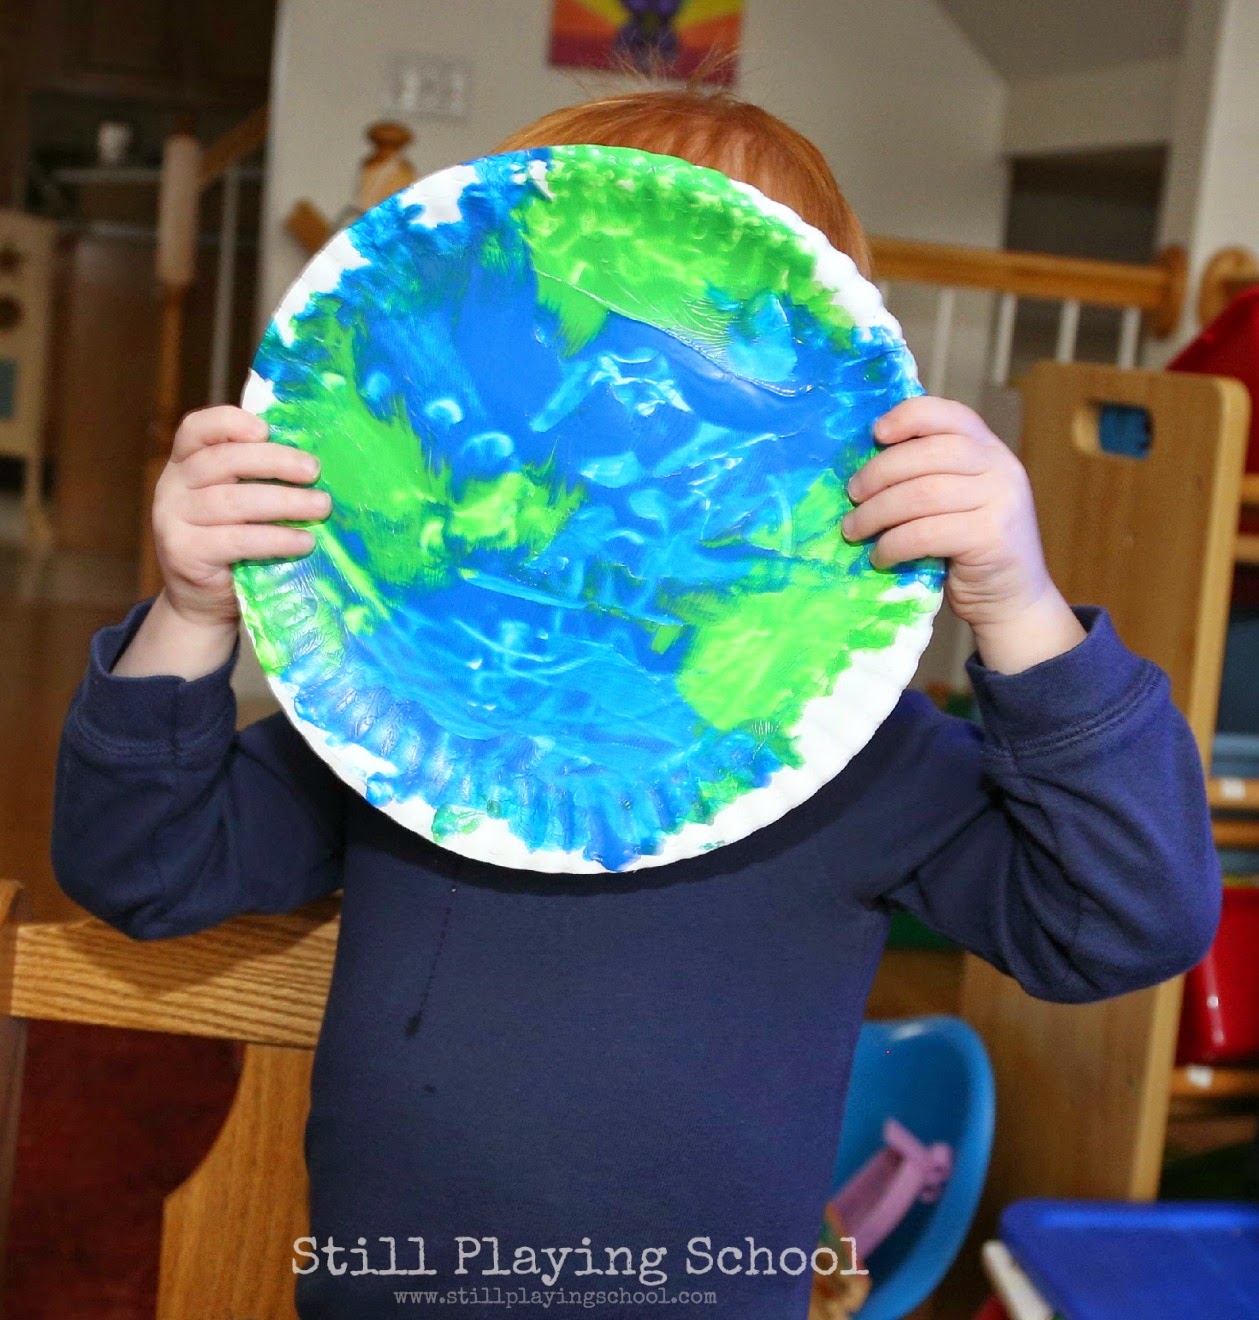 planet earth project ideas